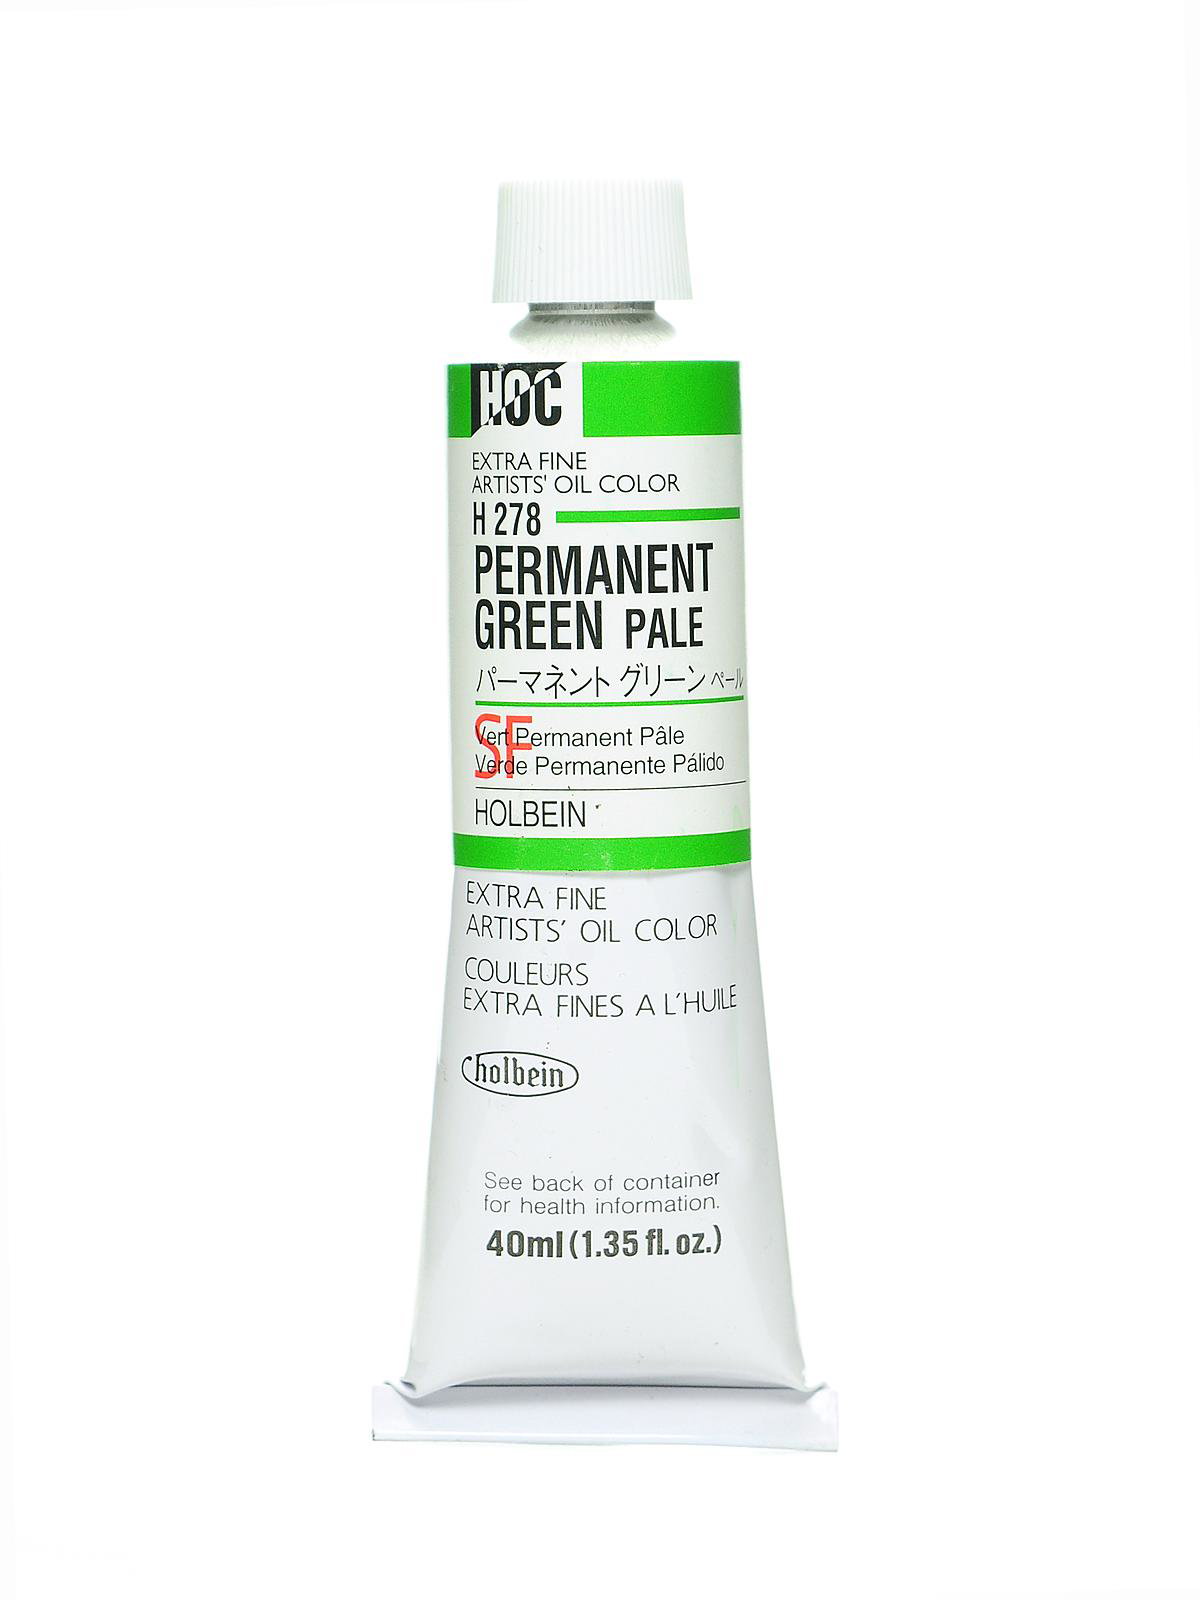 Permanent Green Pale